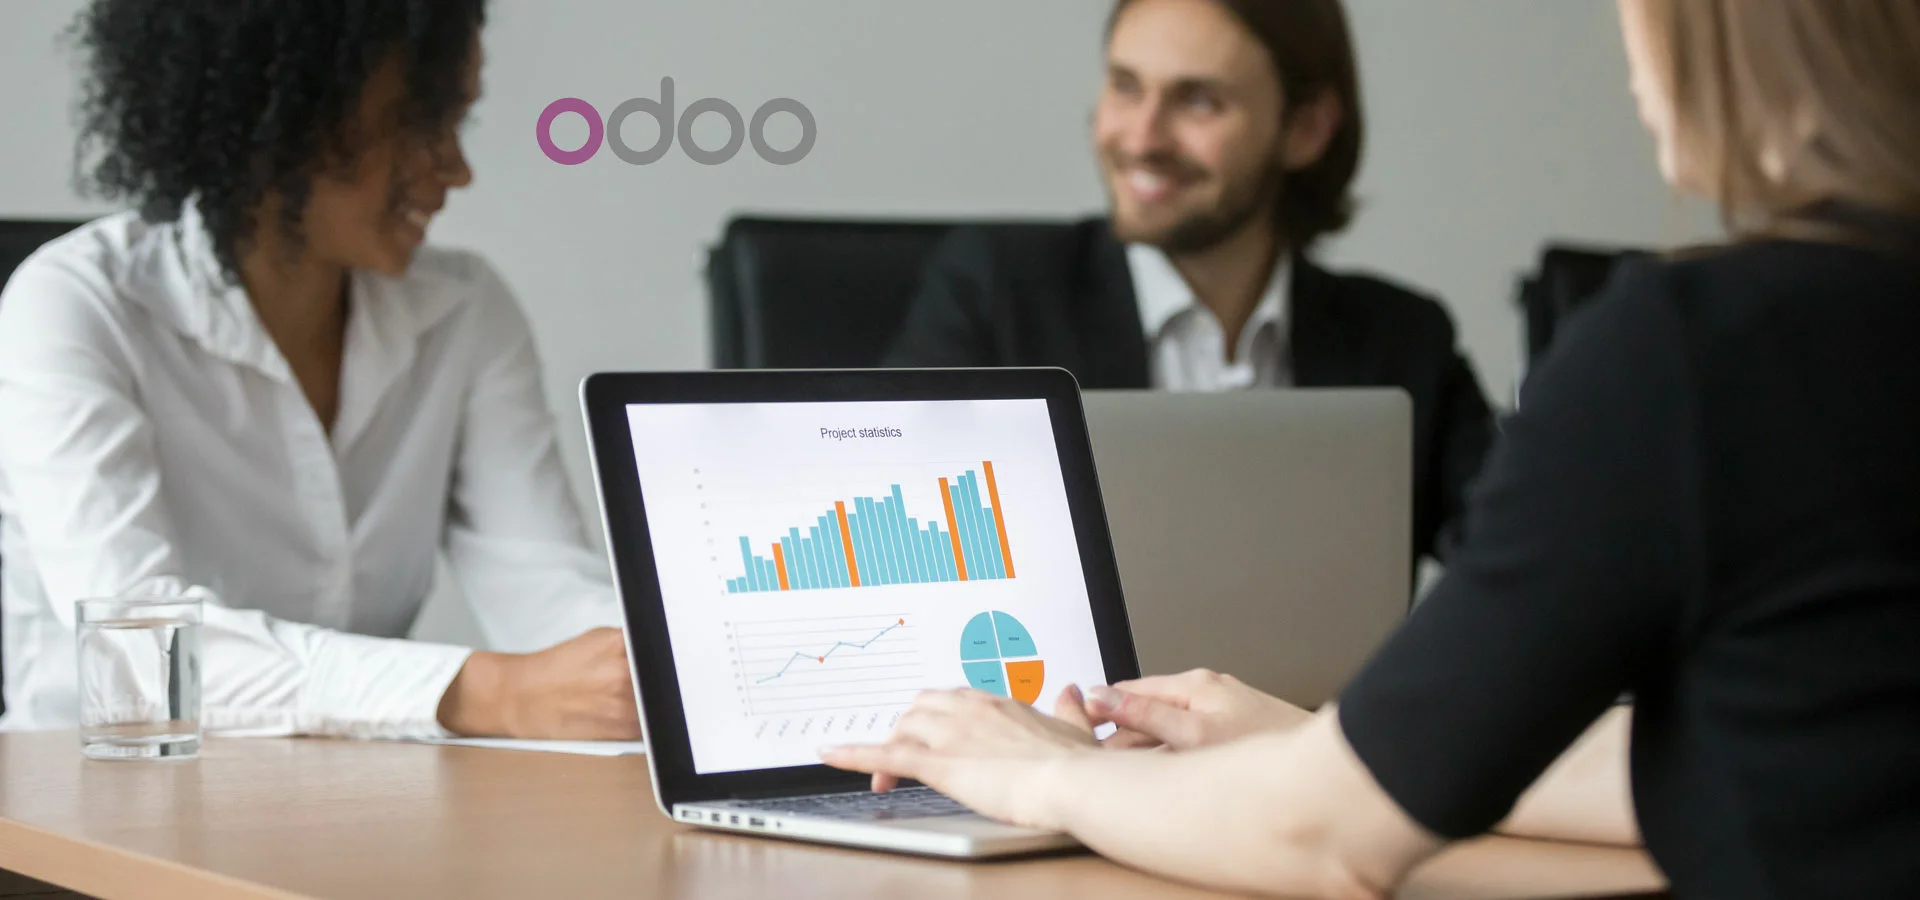 odoo-erp-support-and-services-related-blog-97